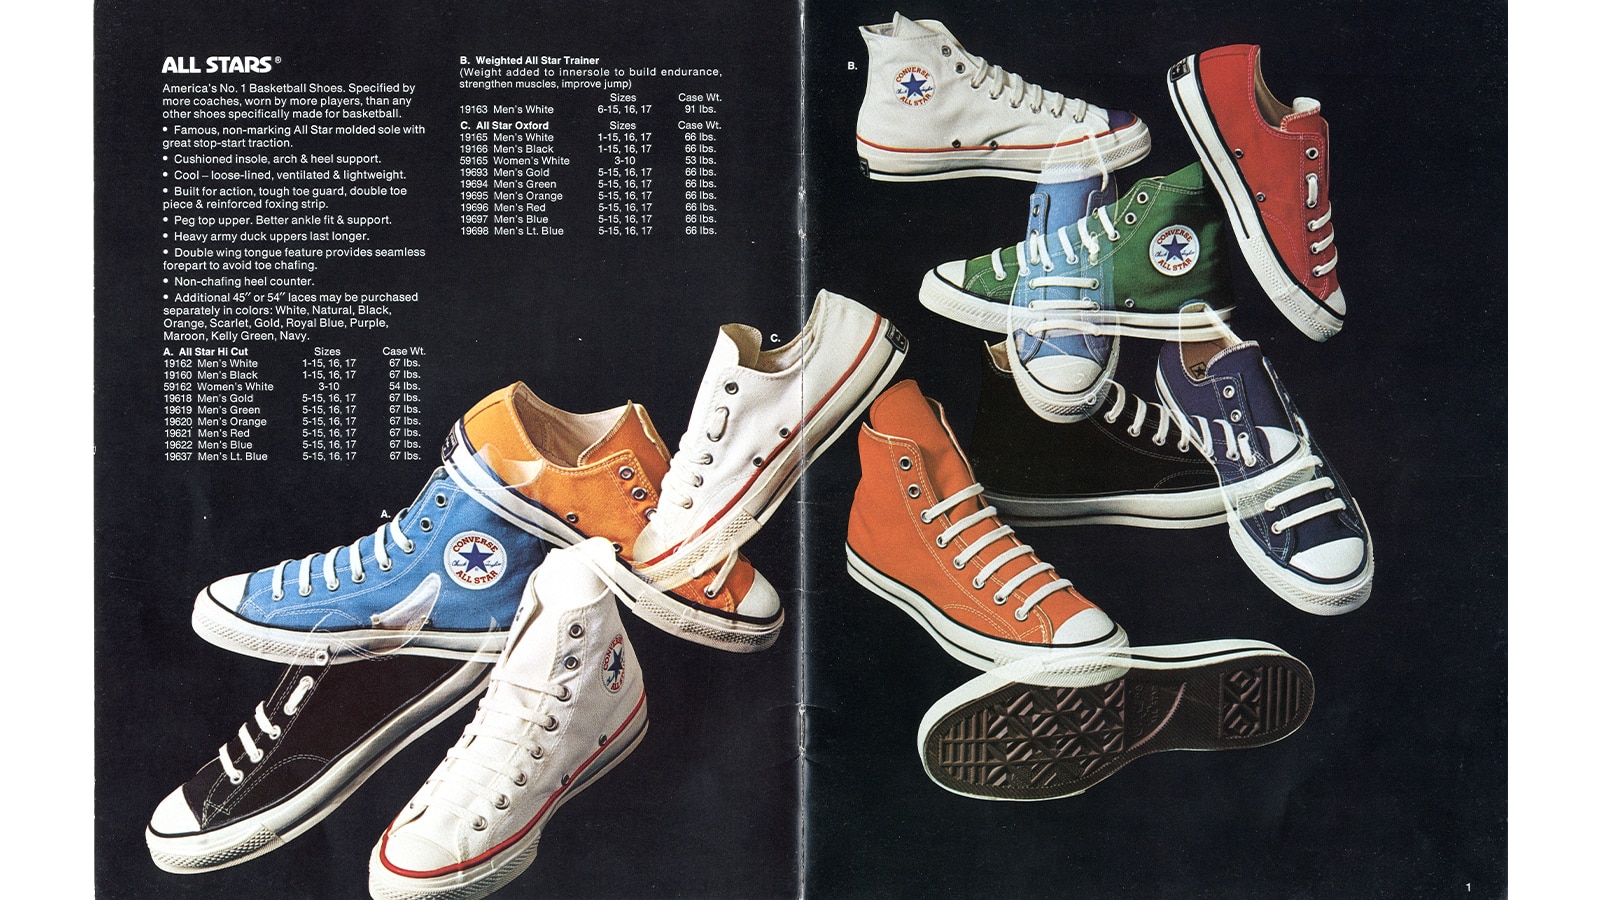 Converse CORE CHUCK TAYLOR ALL STAR High Tops For Men - Buy